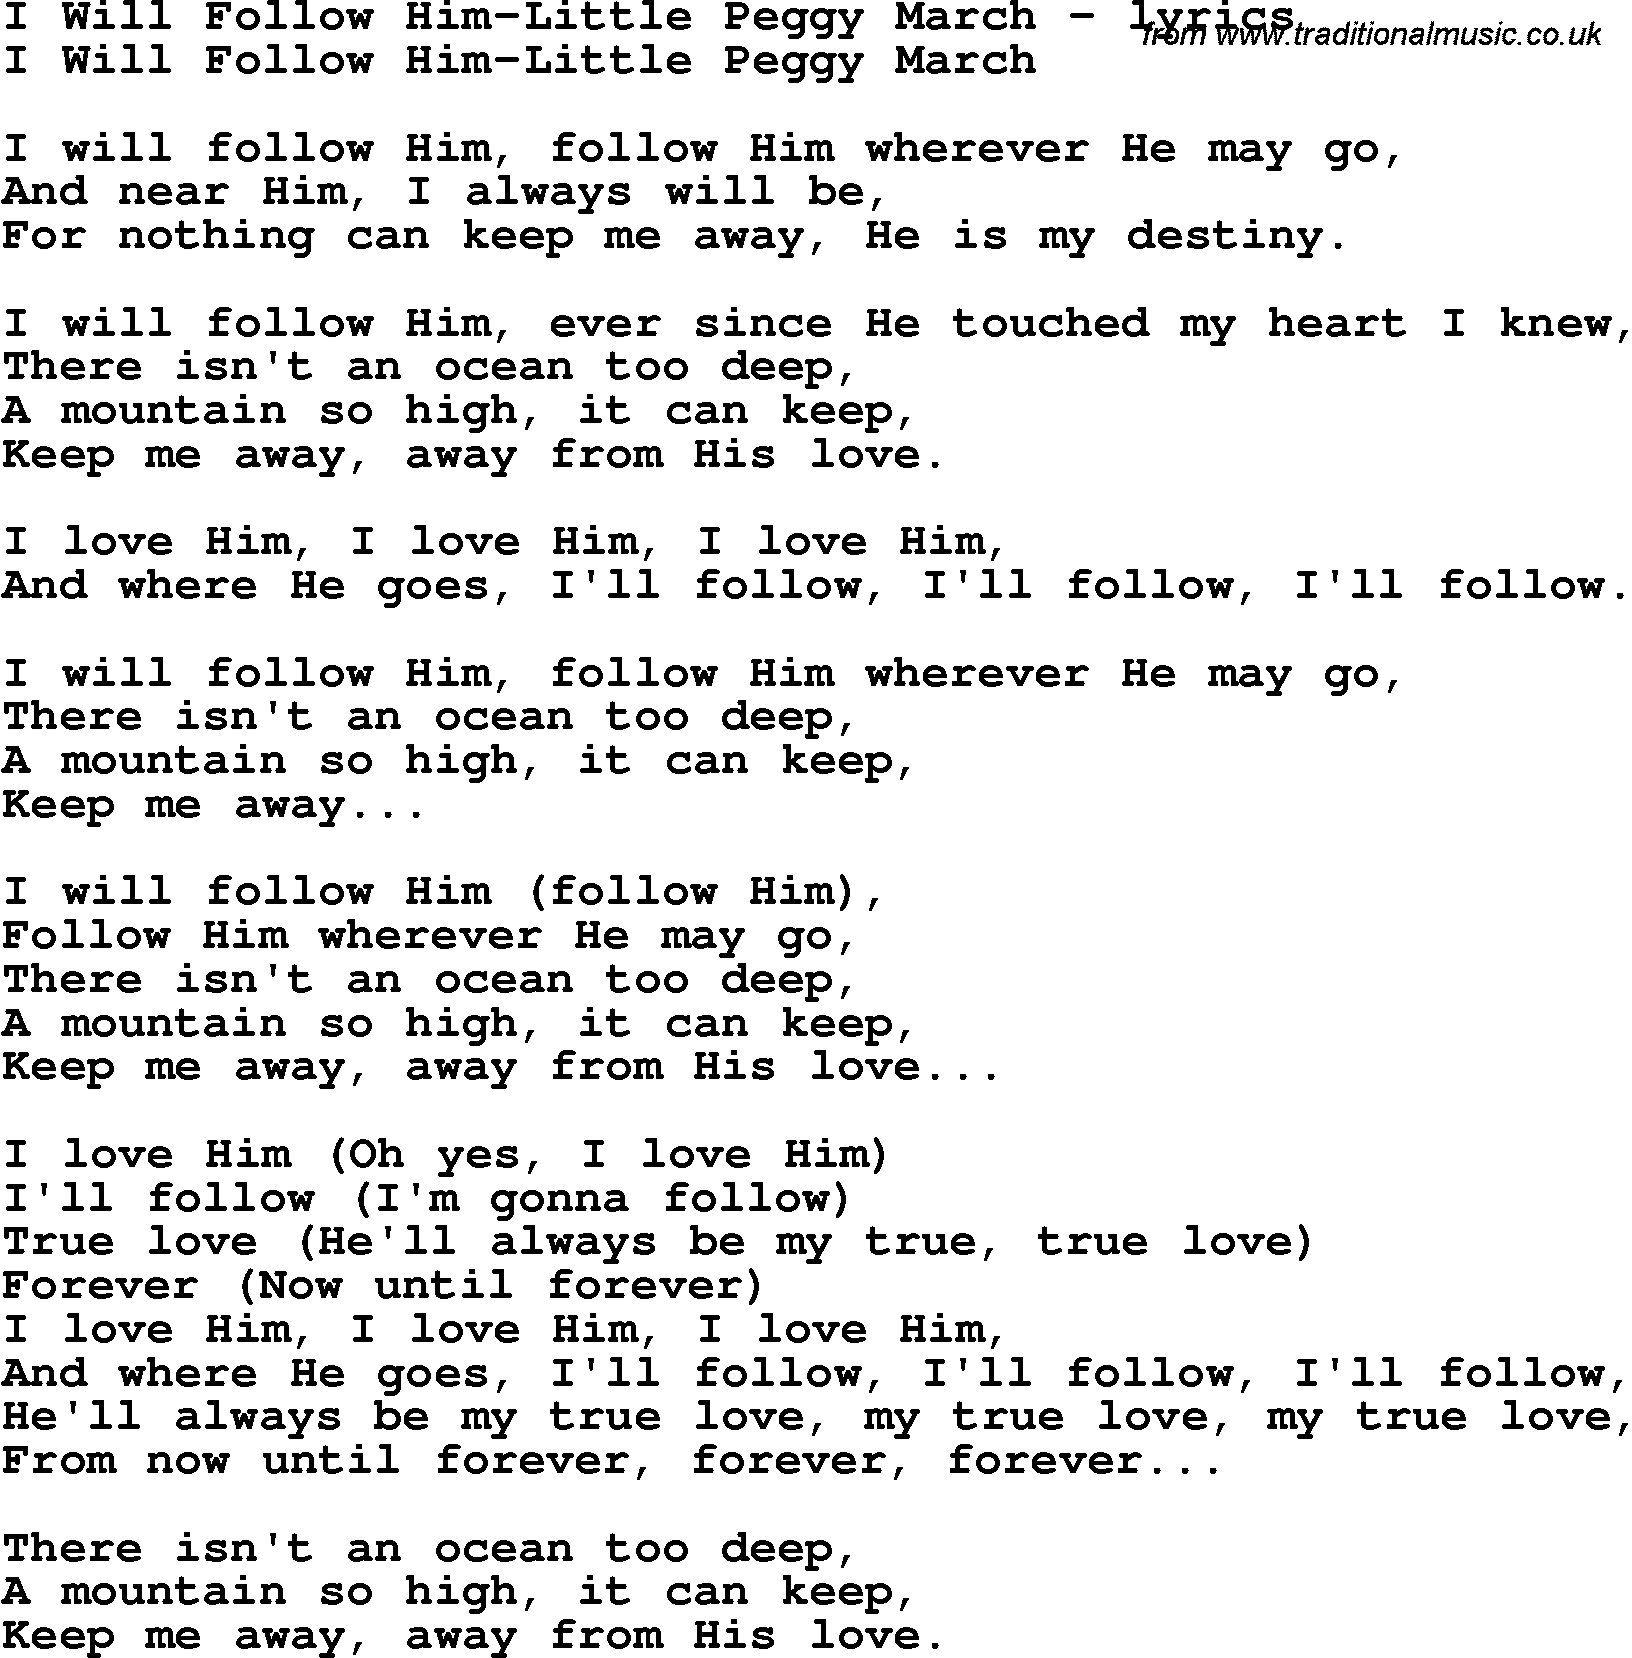 Love Song Lyrics for: I Will Follow Him-Little Peggy March